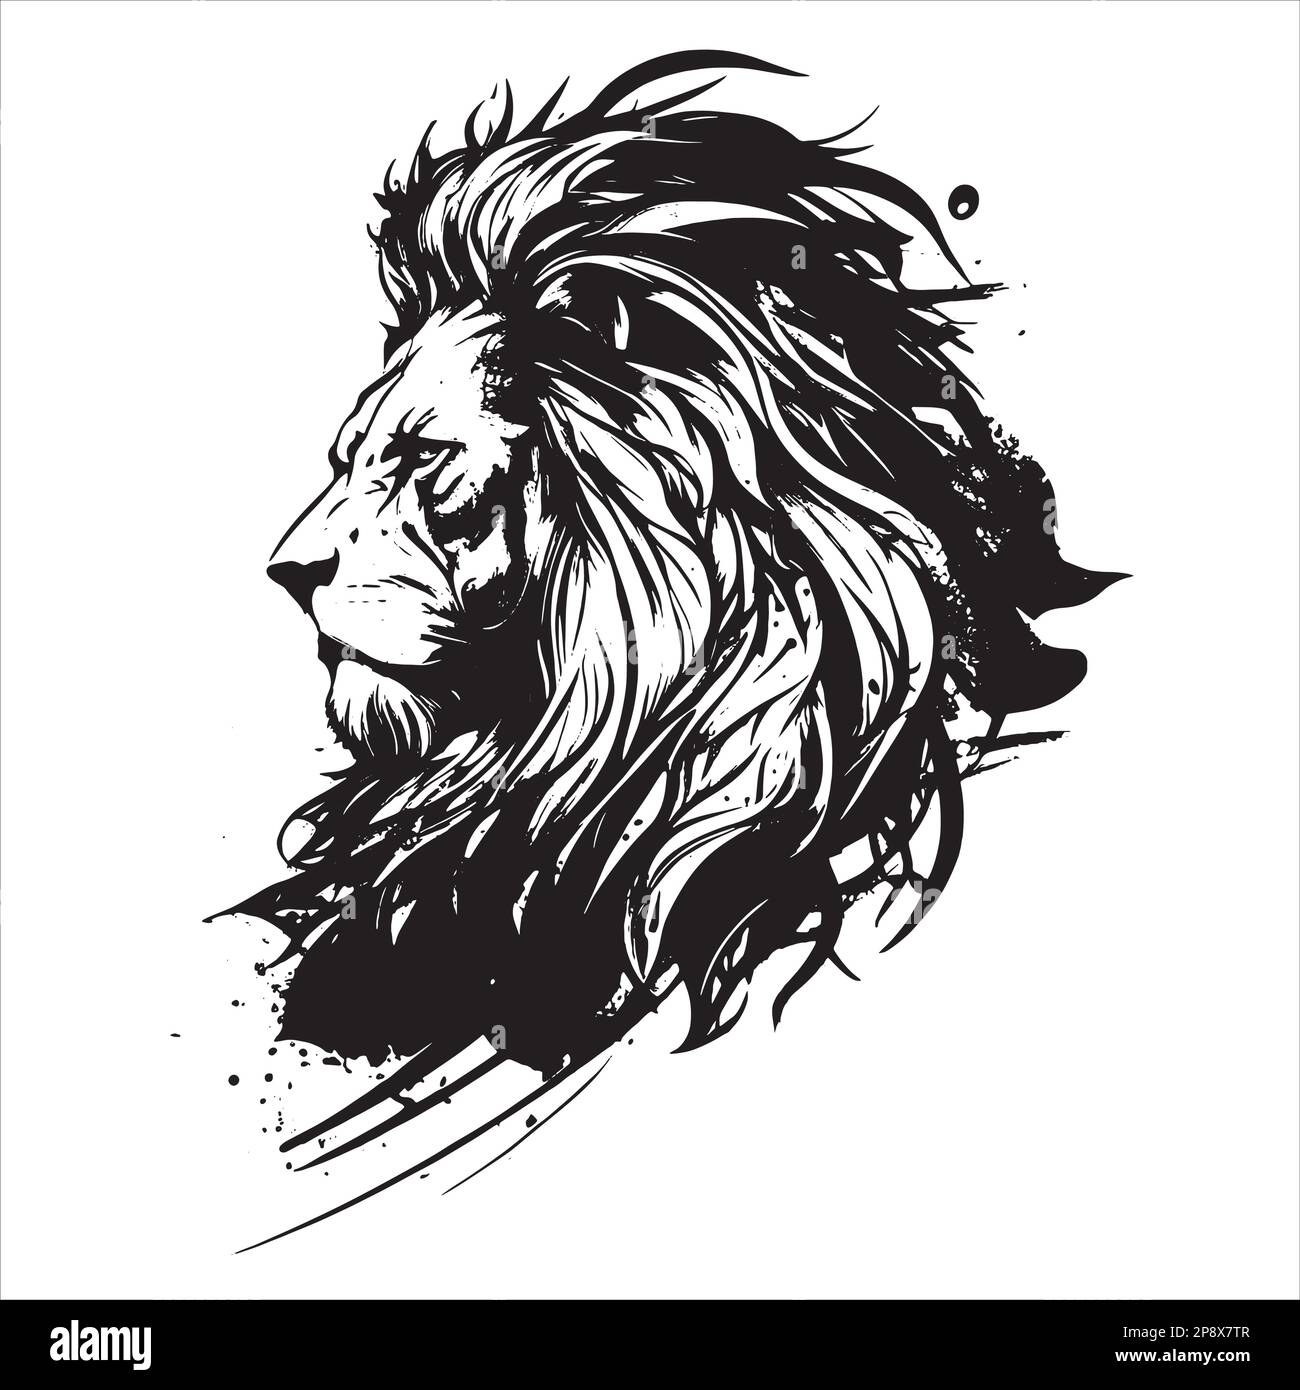 734 Tattoos Flaming Lions Images, Stock Photos, 3D objects, & Vectors |  Shutterstock